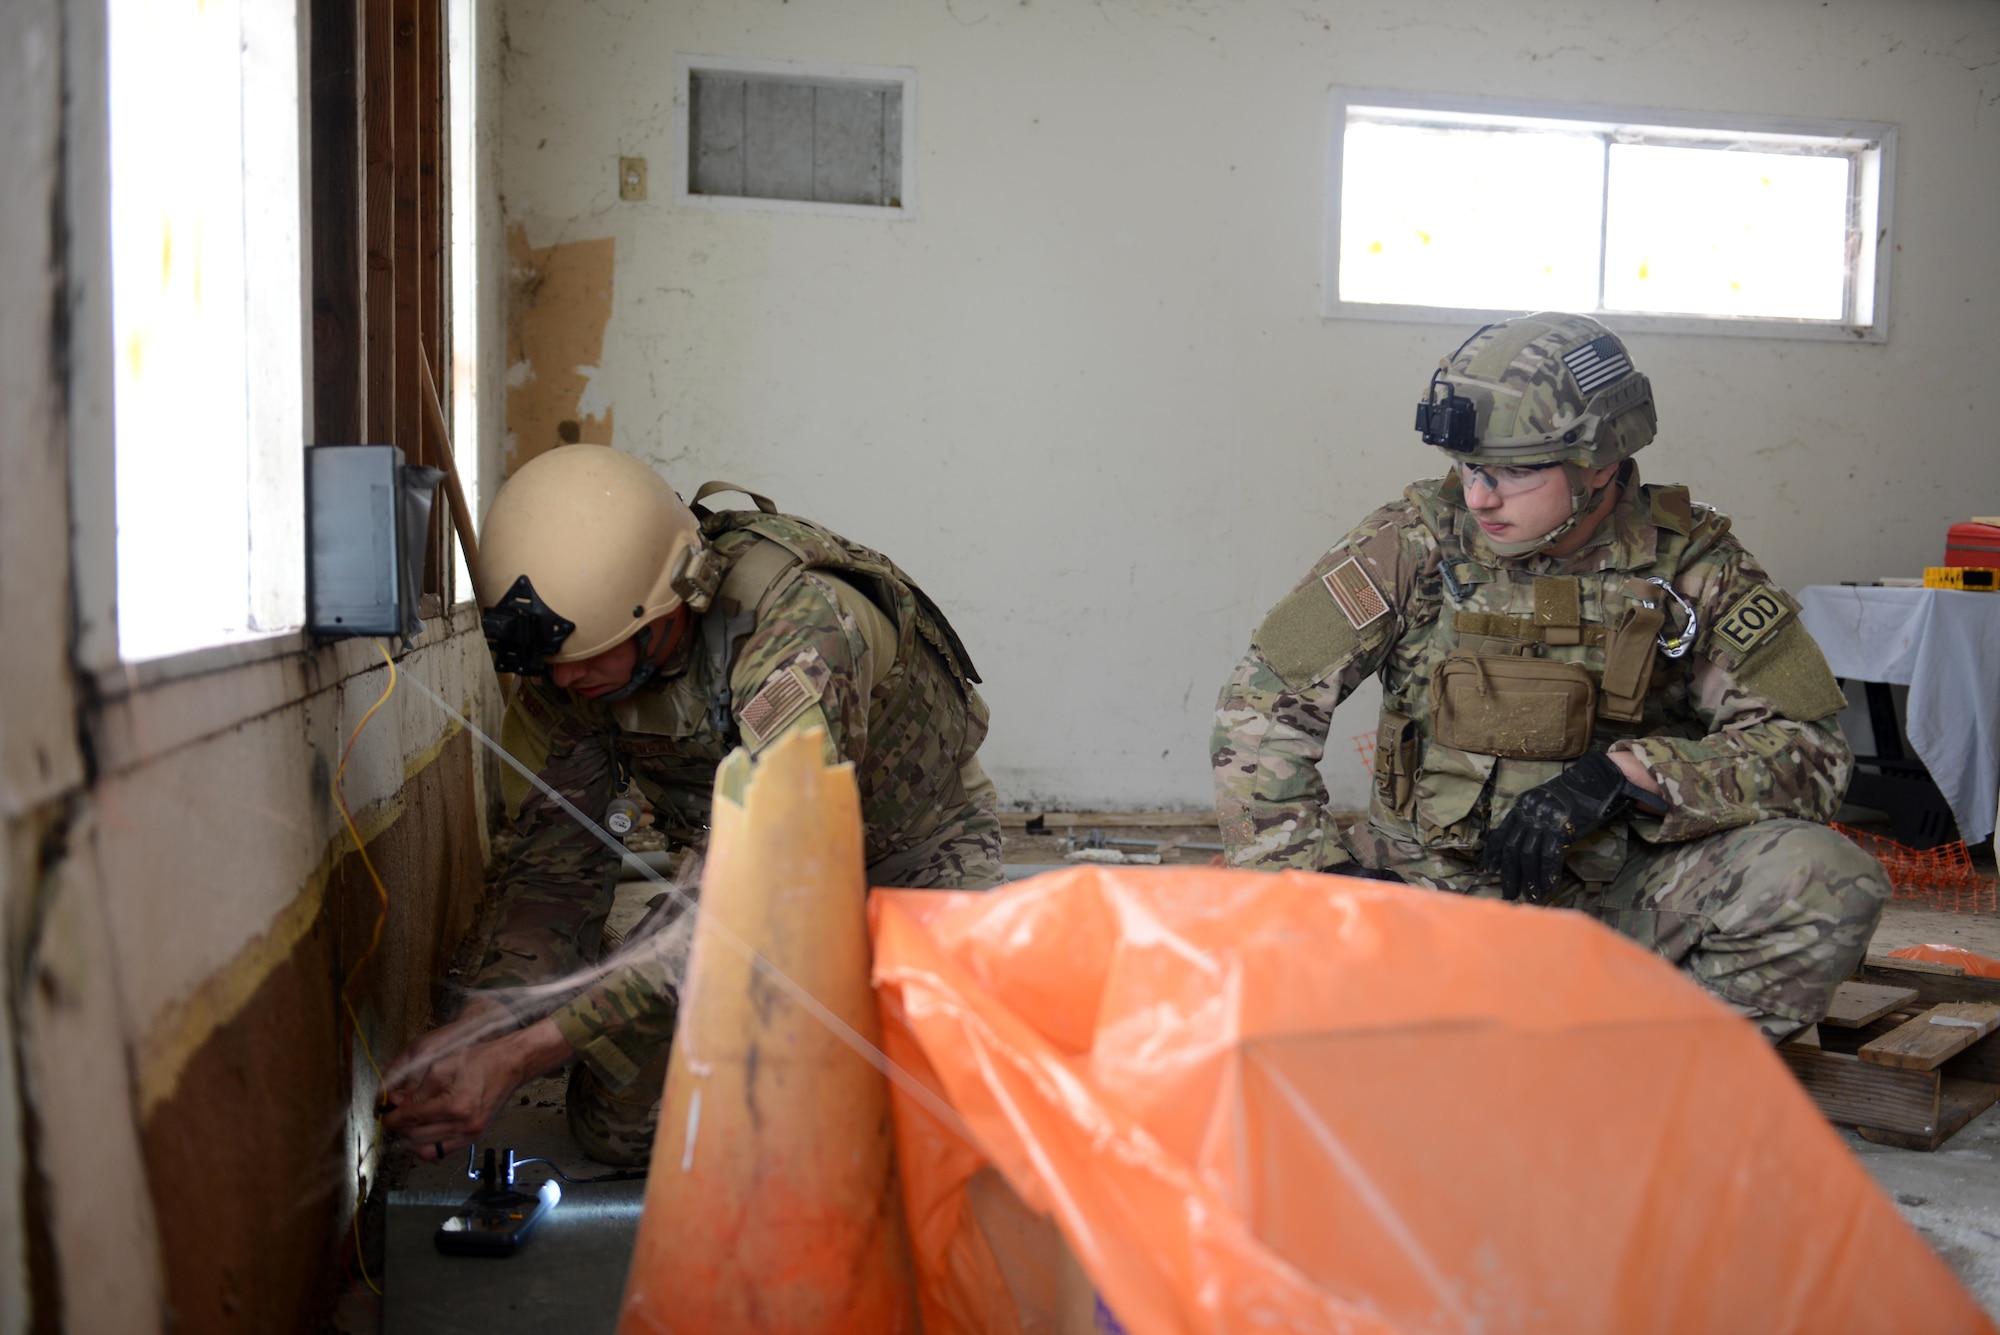 Staff Sgt. David Dezwaan (left), and Airman 1st Class Alex Nona, 60th Civil Engineer Squadron explosive ordnance disposal technicians, diffuse a simulated improvised explosive device May 5th, 2016, at Clear Lake, California. Dezwaan and Nona were participating in Operation: Half-Life, an exercise designed to evaluate a synchronized, multi-agency response to a crisis situation. (U.S. Air Force photo by Senior Airman Bobby Cummings)